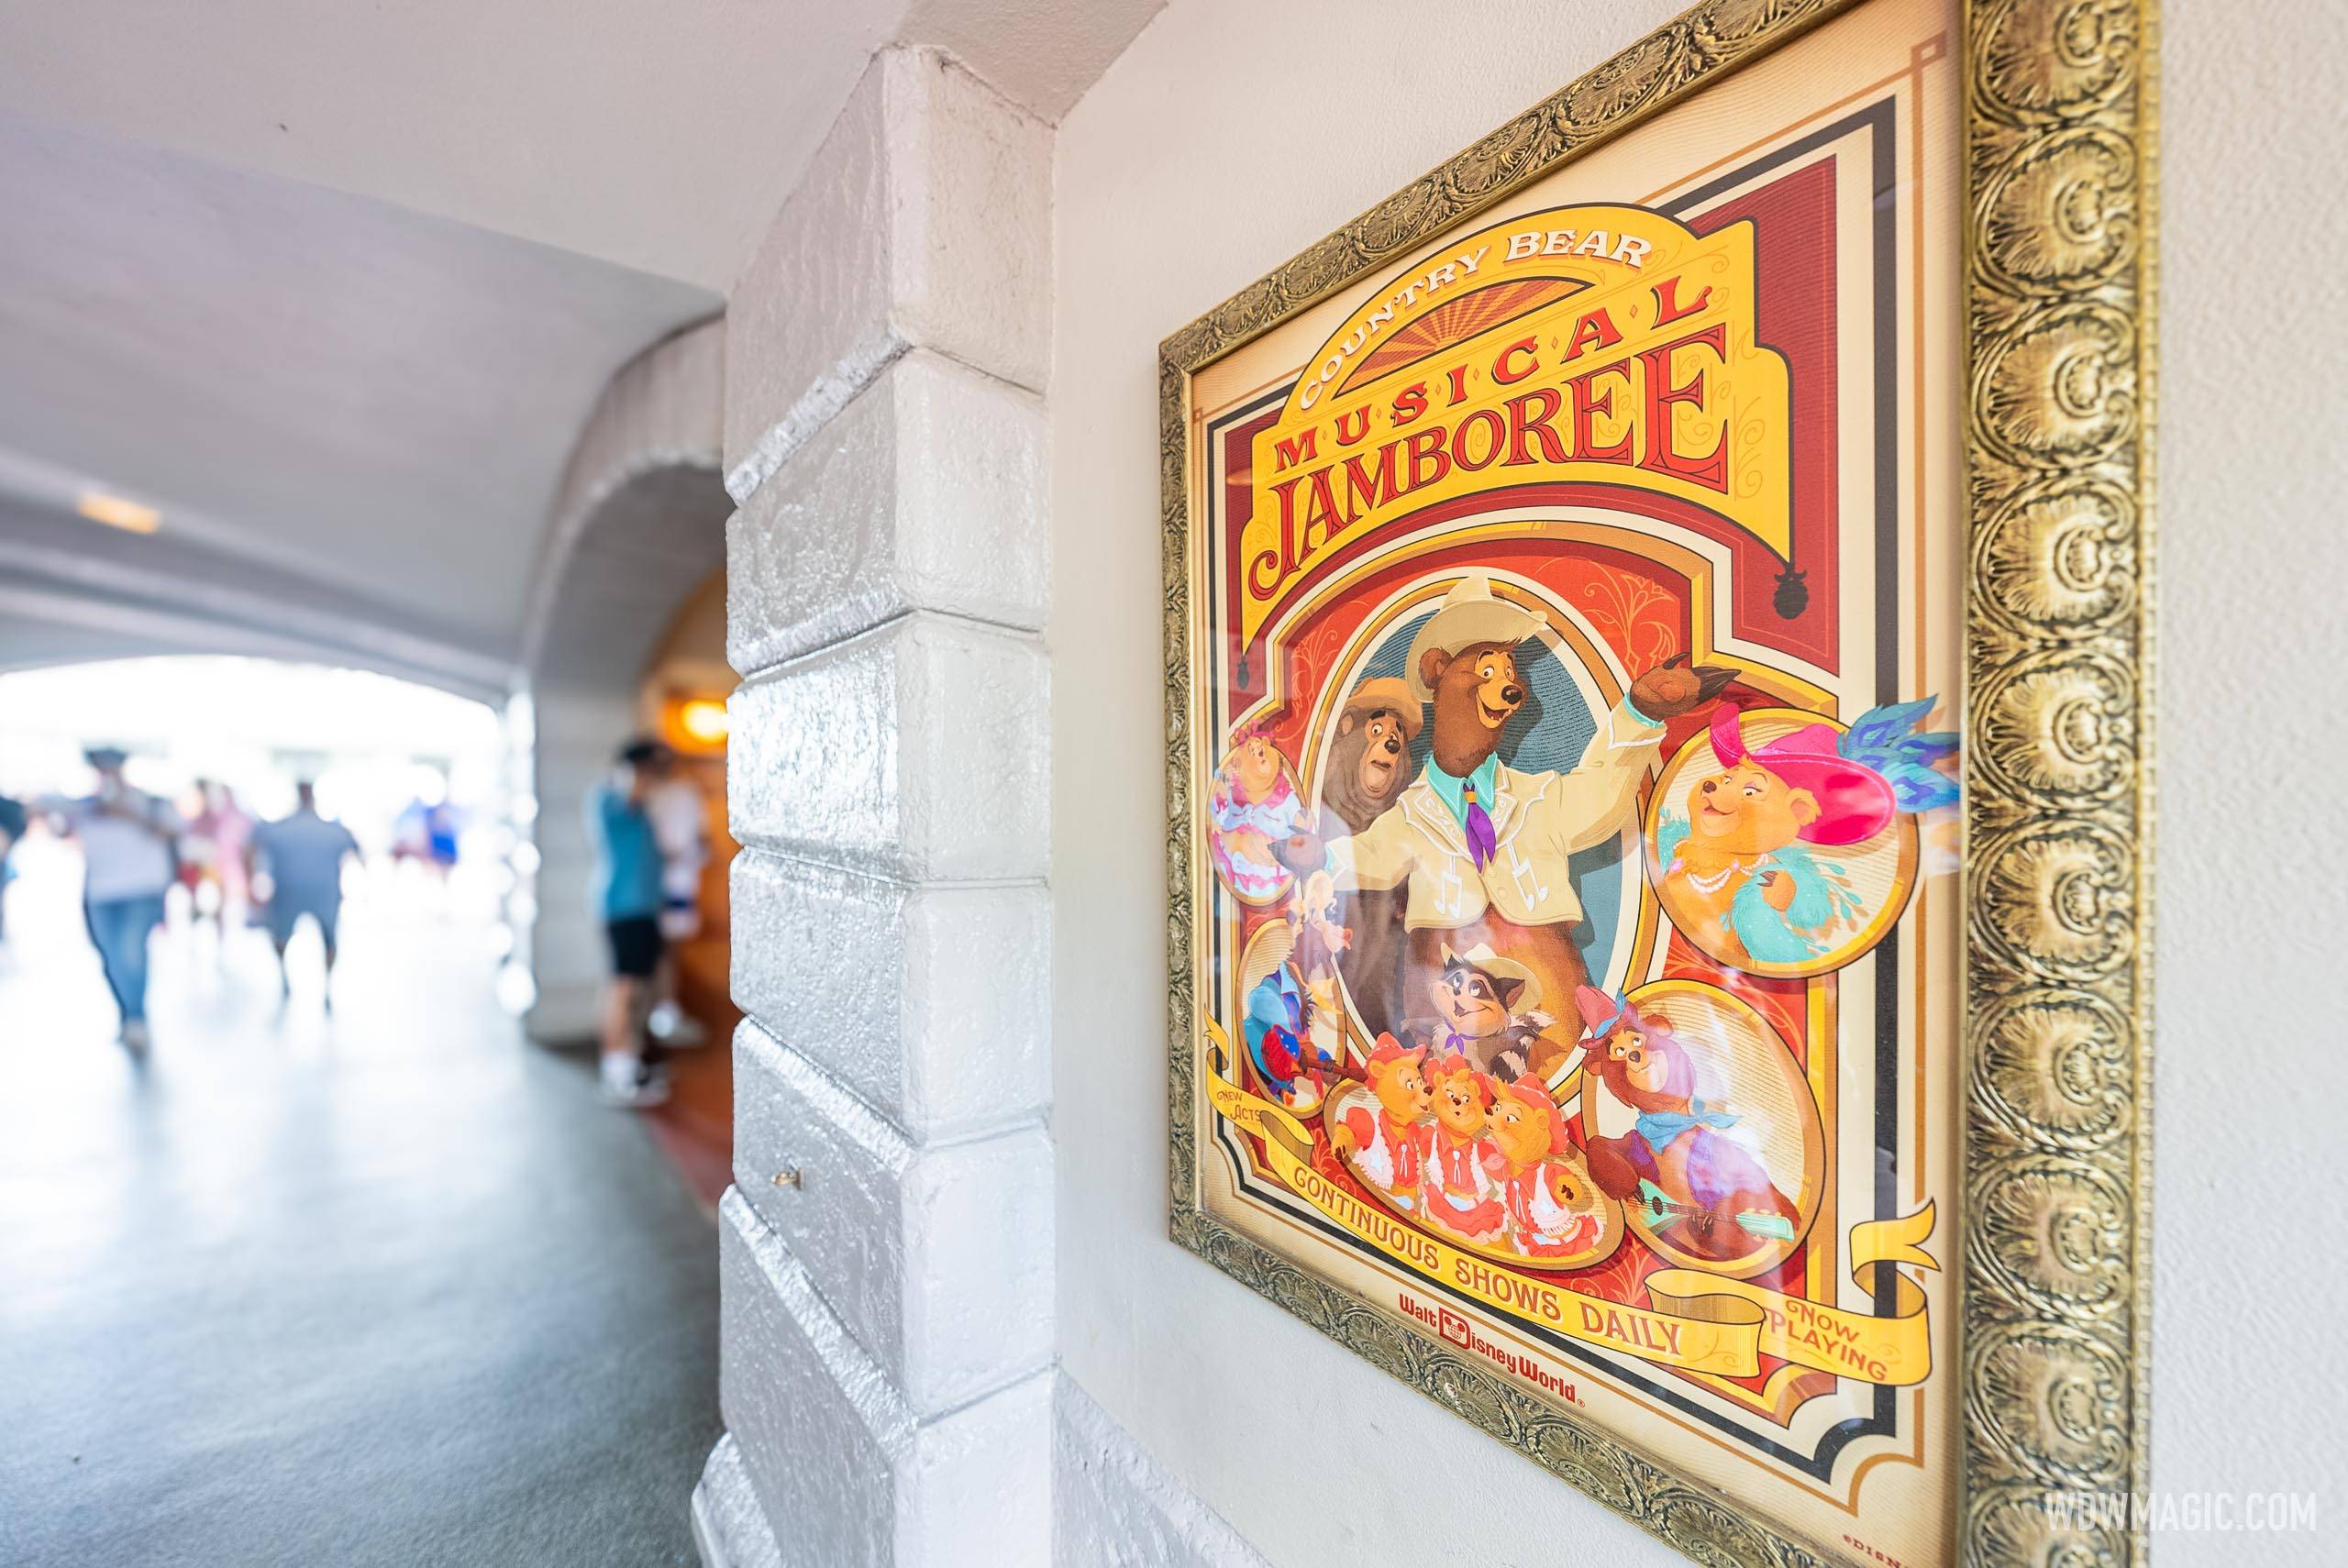 Disney Pays Homage to Original 1971 LP with New Country Bear Musical Jamboree Attraction Poster at Magic Kingdom